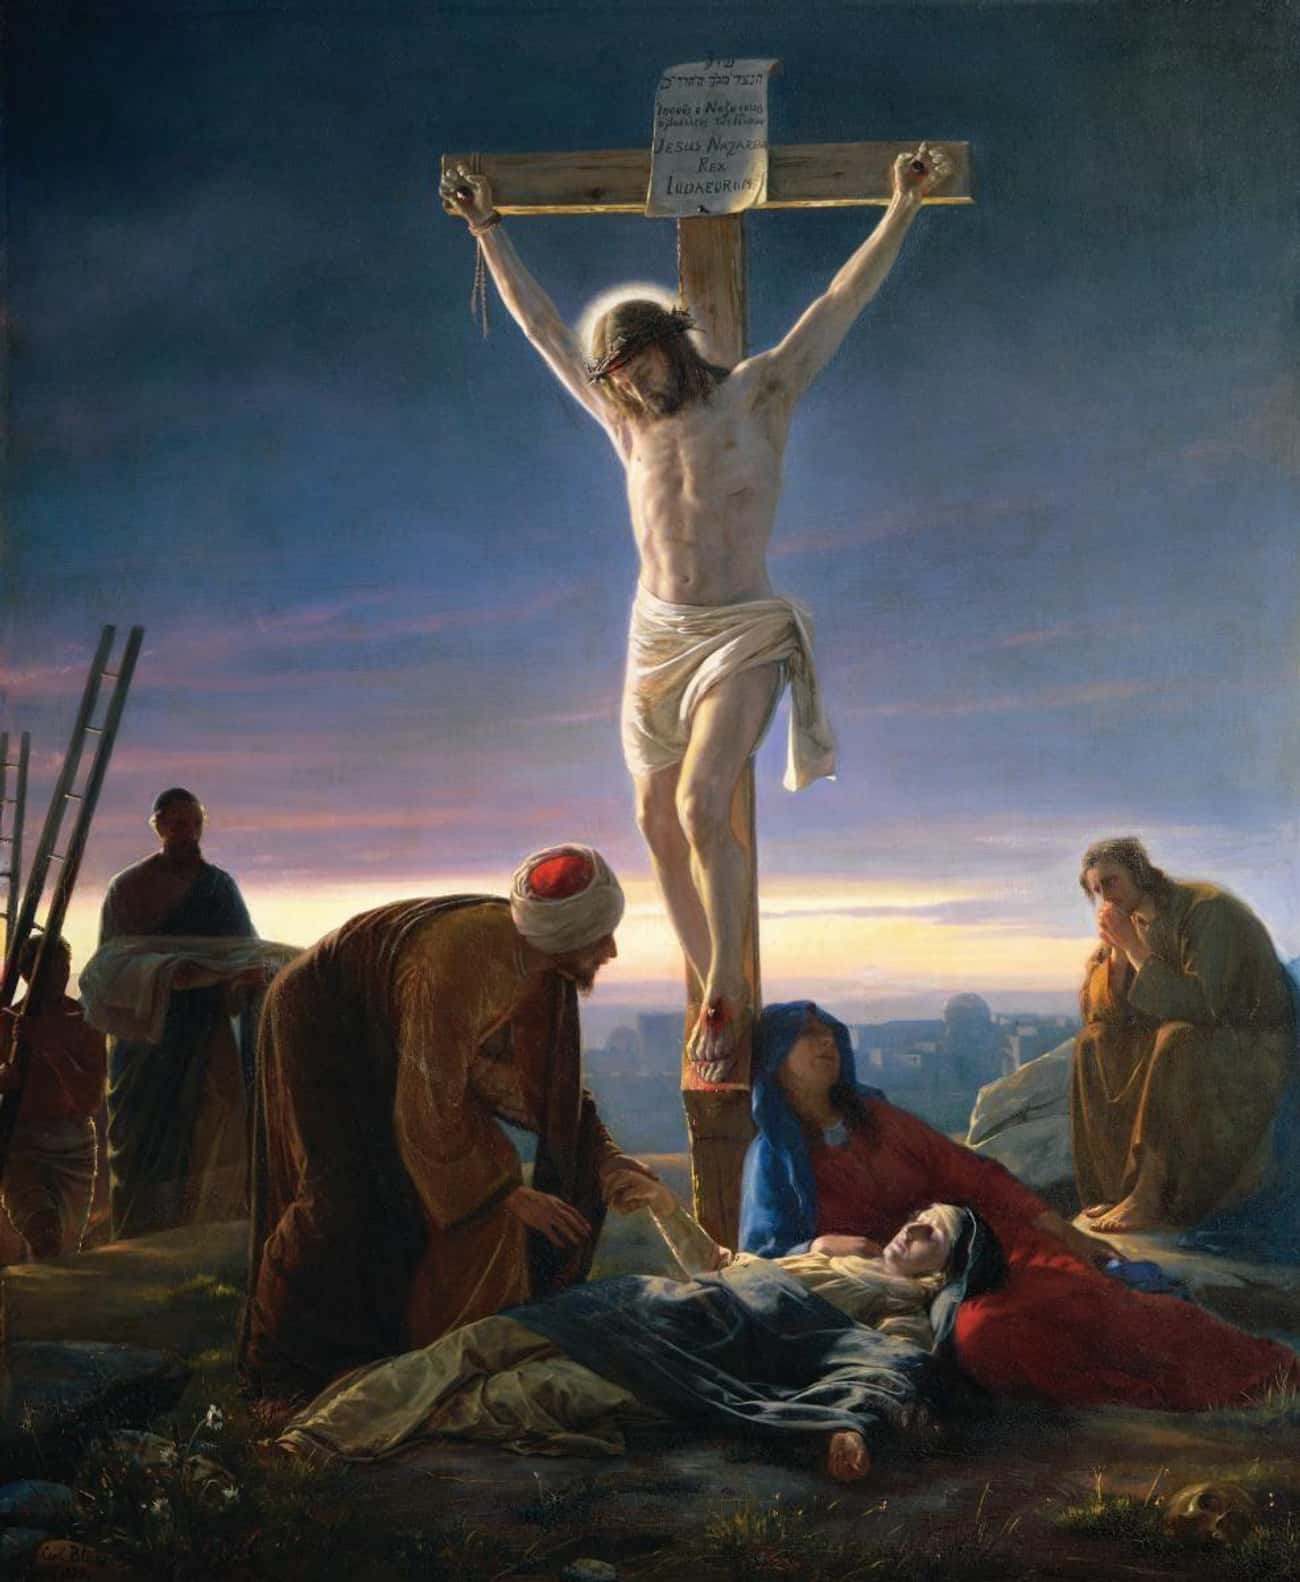 Crucifixion Was Banned In The Roman Empire In 337 AD